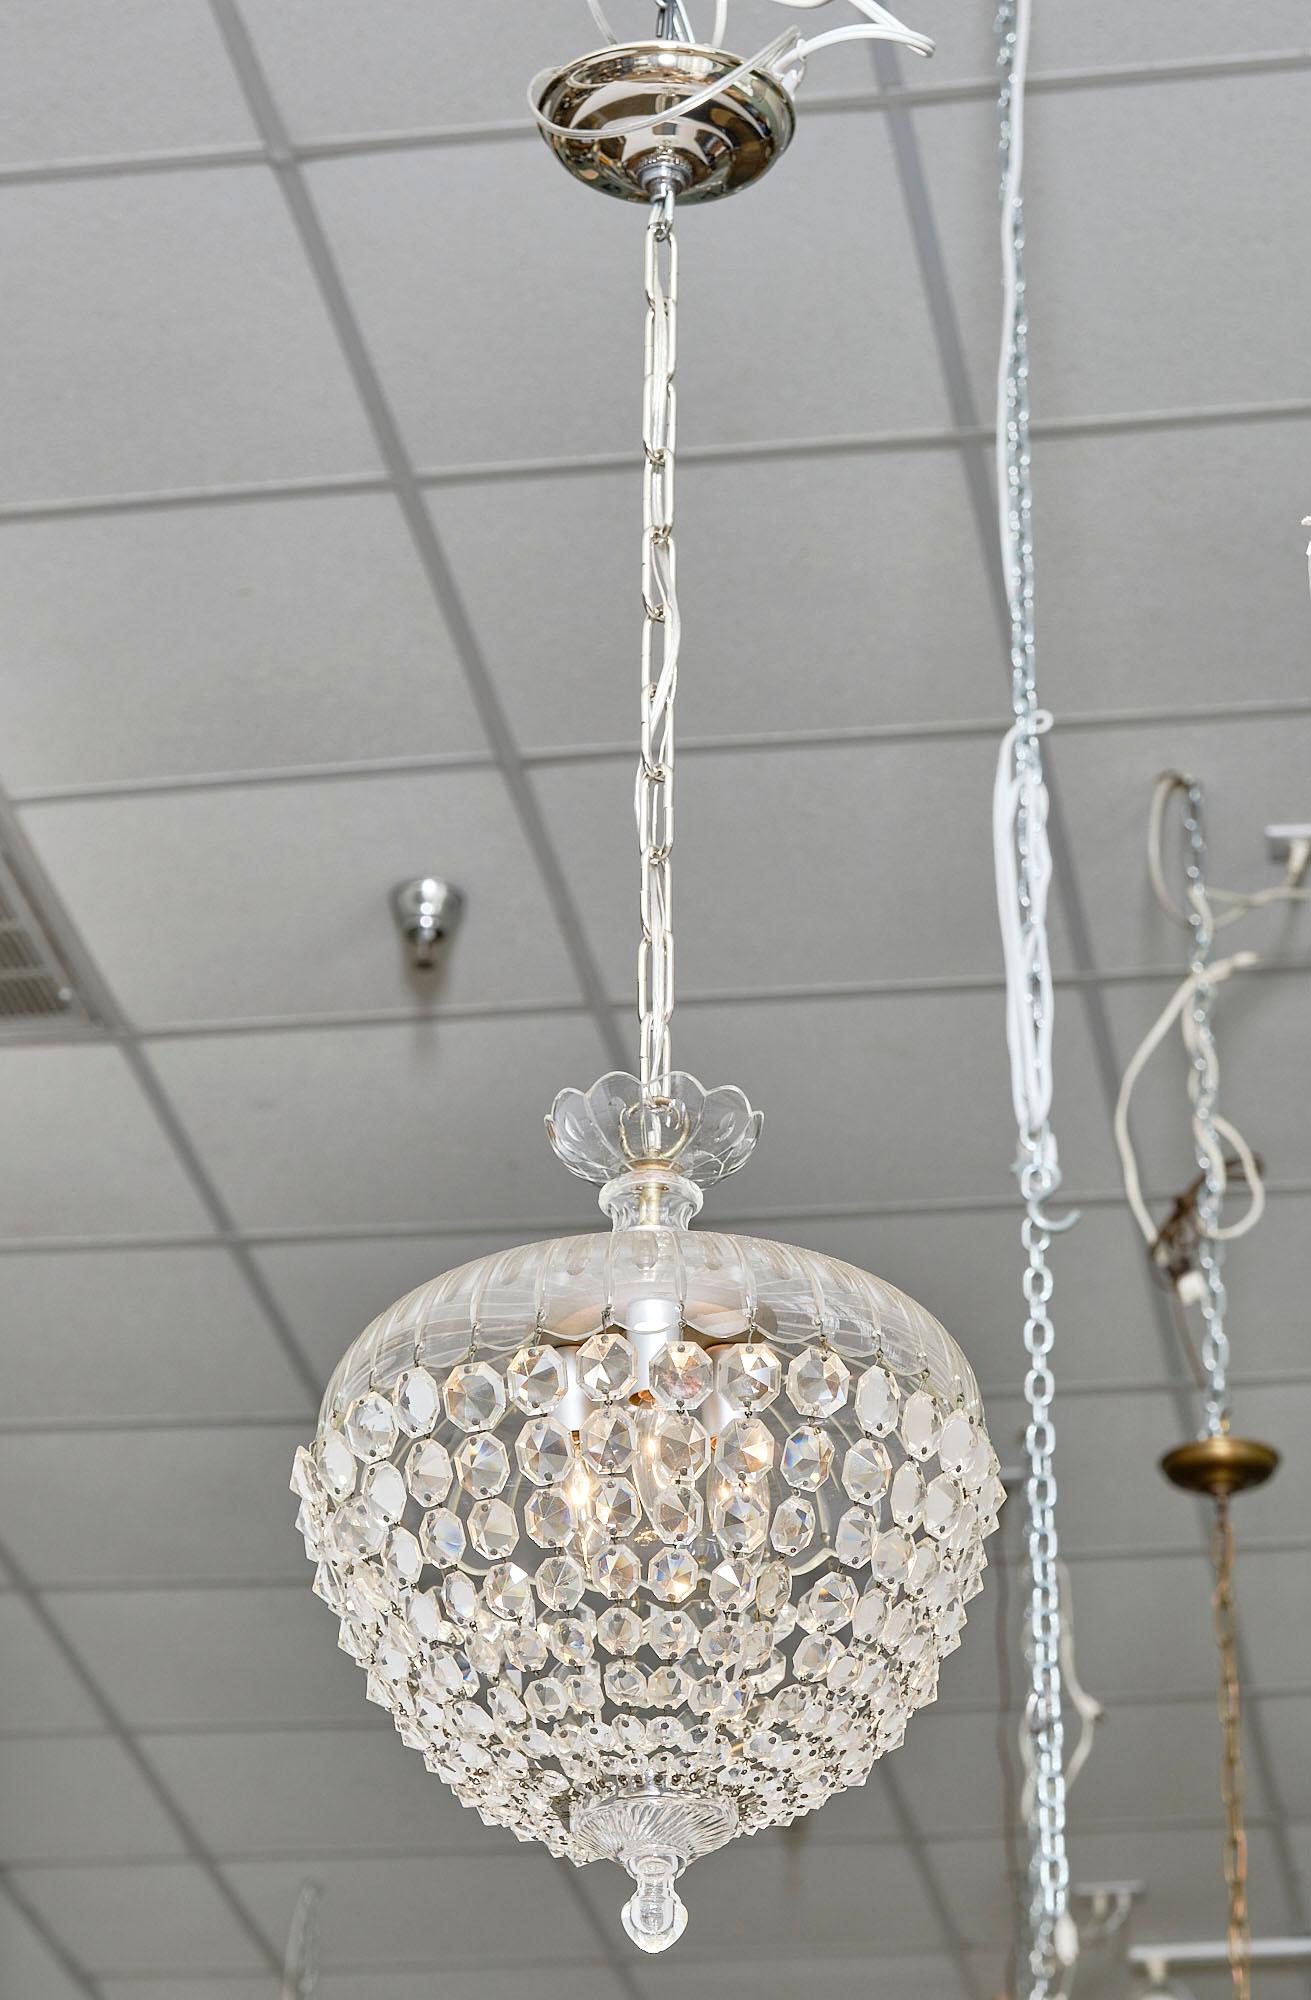 Chandelier from France made of crystal in the typical bell shape by Baccarat. This piece has been newly wired to fit US standards.